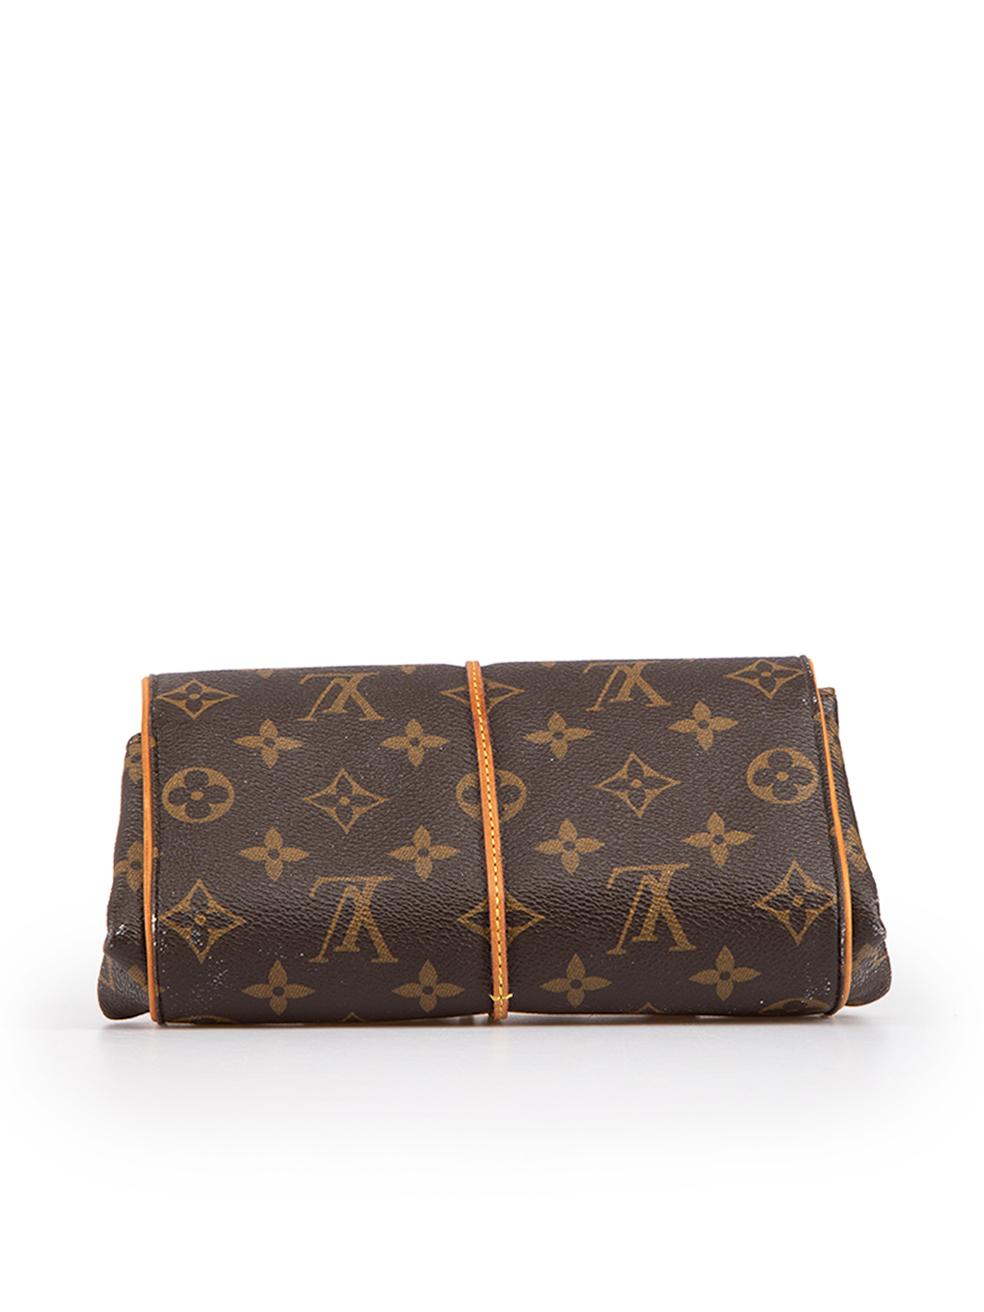 CONDITION is Very good. Minimal wear to jewellery roll pouch is evident. Minimal tarnishing to inner poppers, slight dye residue to outer canvas and some loose threads to cord fastenings on this used Louis Vuitton designer resale item.

 Details
